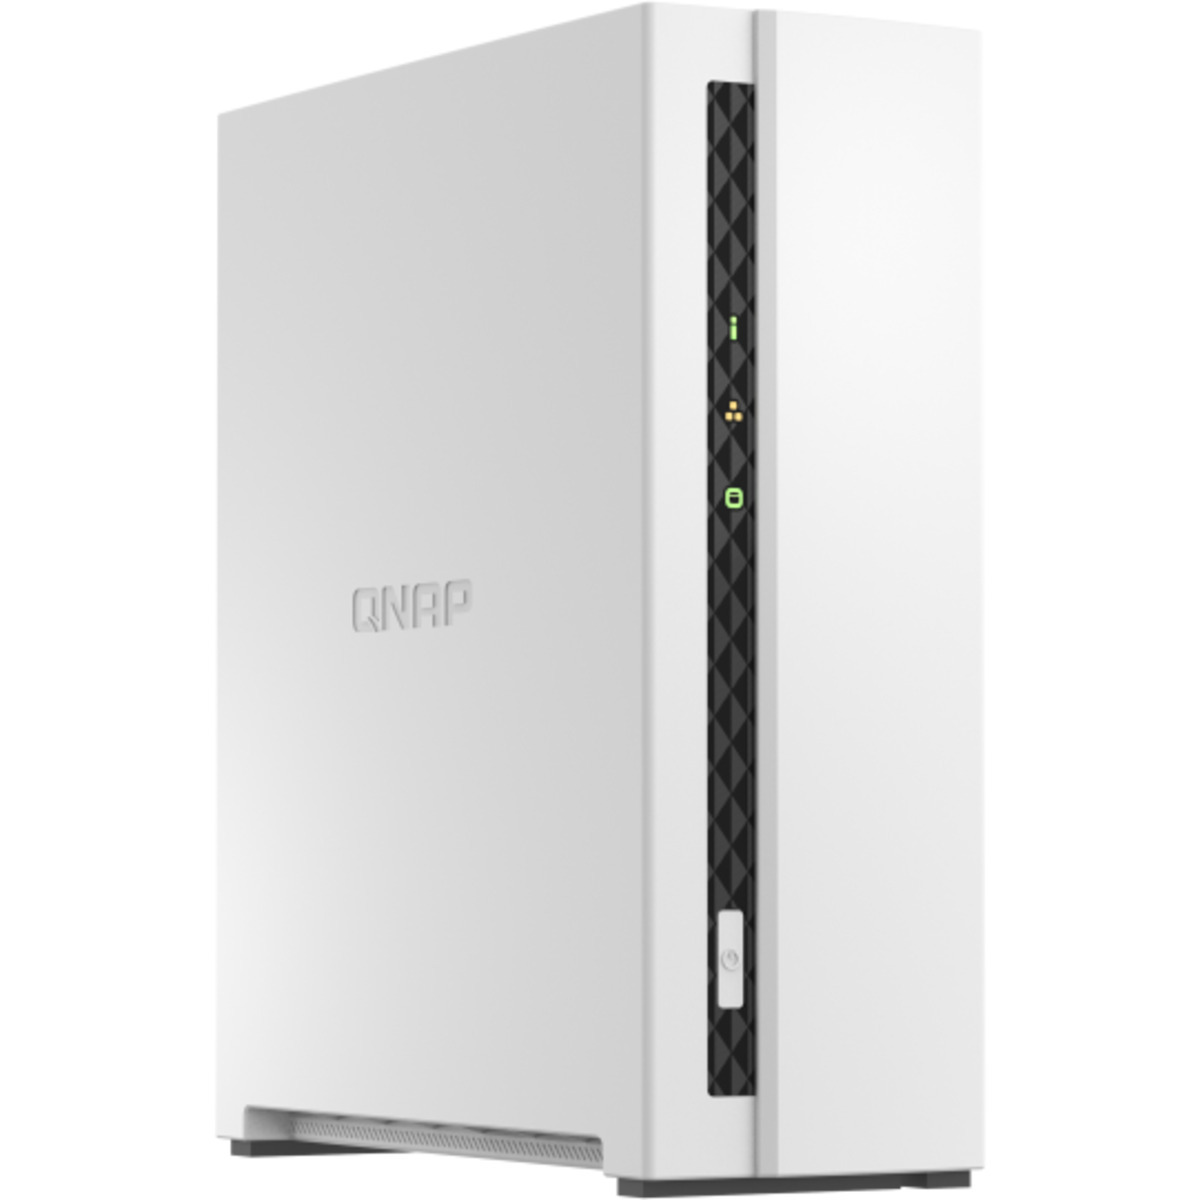 QNAP TS-133 6tb 1-Bay Desktop Personal / Basic Home / Small Office NAS - Network Attached Storage Device 1x6tb Western Digital Gold WD6003FRYZ 3.5 7200rpm SATA 6Gb/s HDD ENTERPRISE Class Drives Installed - Burn-In Tested TS-133